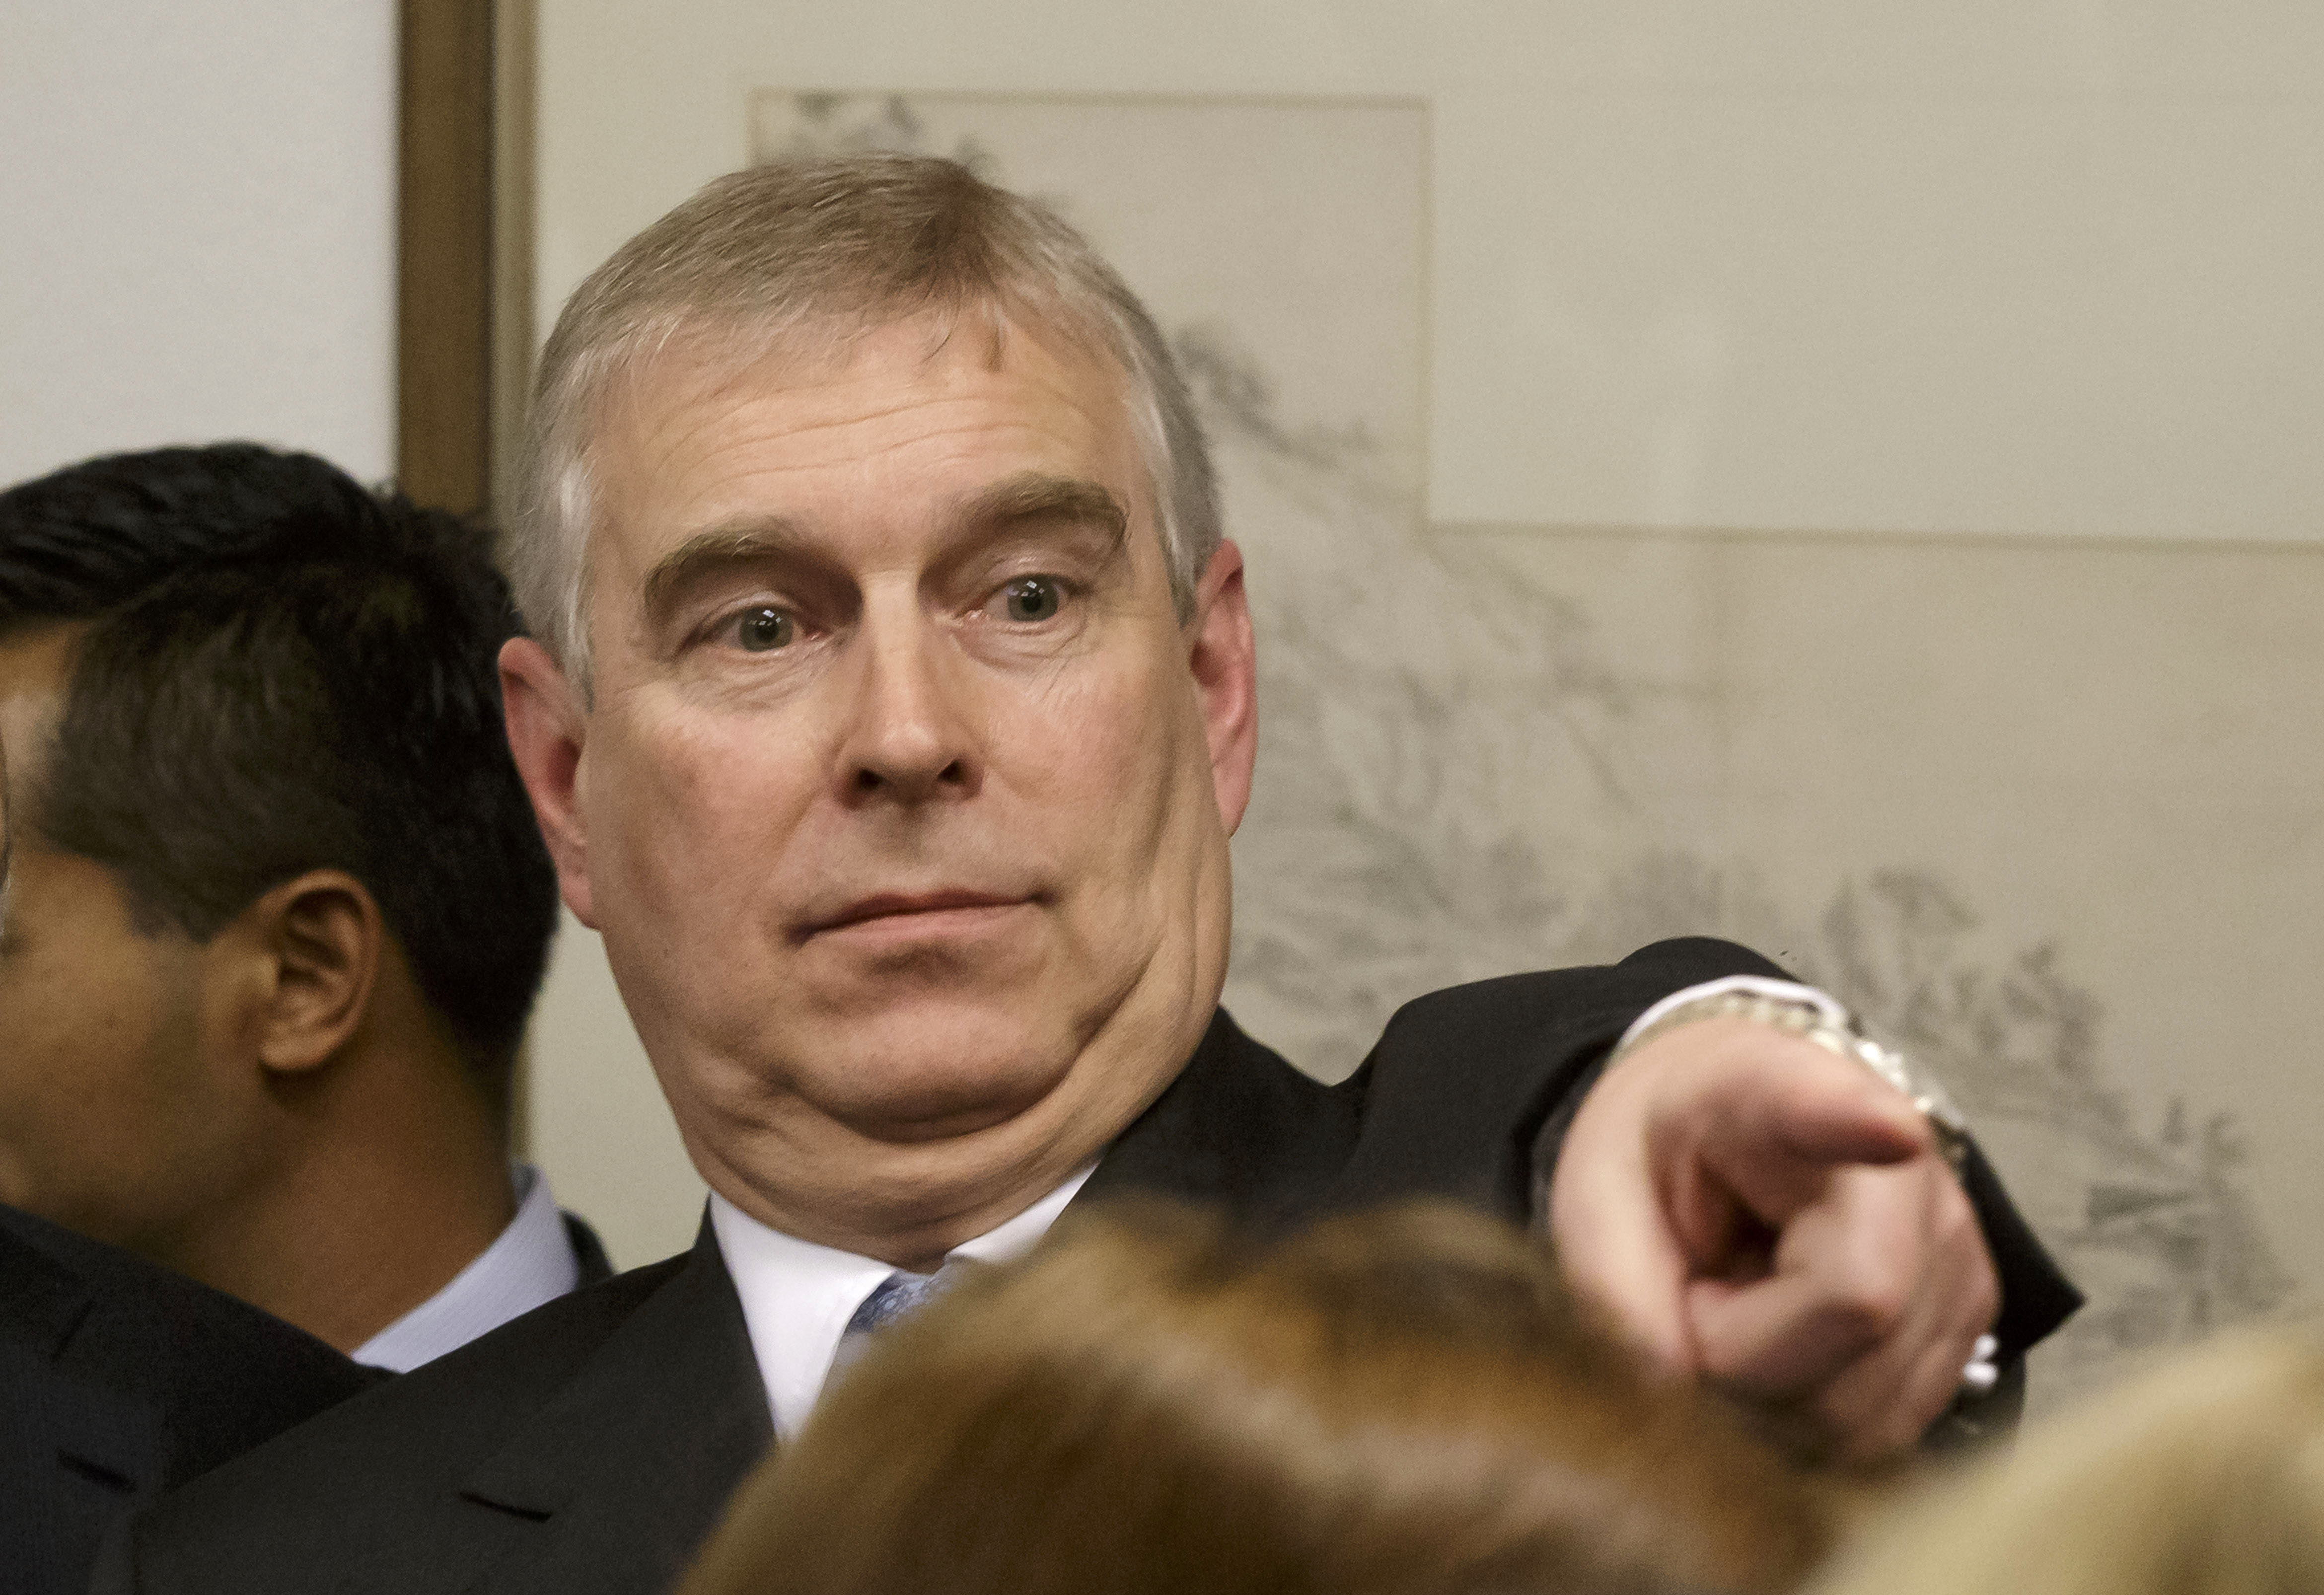 Prince Andrew, Duke of York points his finger as he speaks to business leaders during a reception at the sideline of the World Economic Forum on January 22, 2015 in Davos Switzerland. (Michel Euler/WPA Pool—Getty Images)